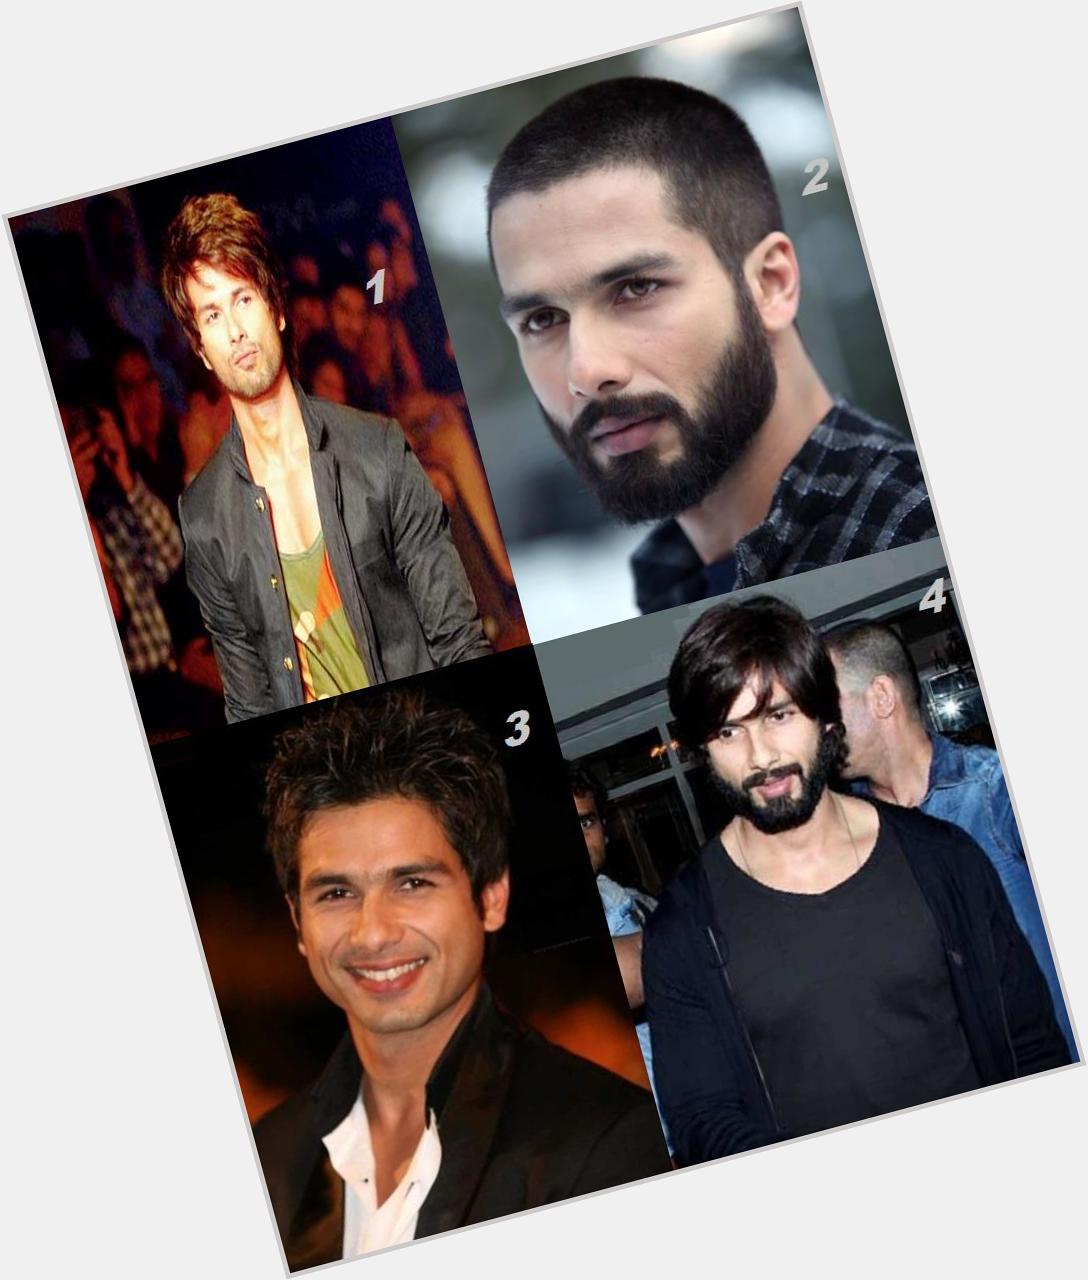 Happy Birthday to Shahid Kapoor -_-

Which style B| of Shahid you like the most ???  